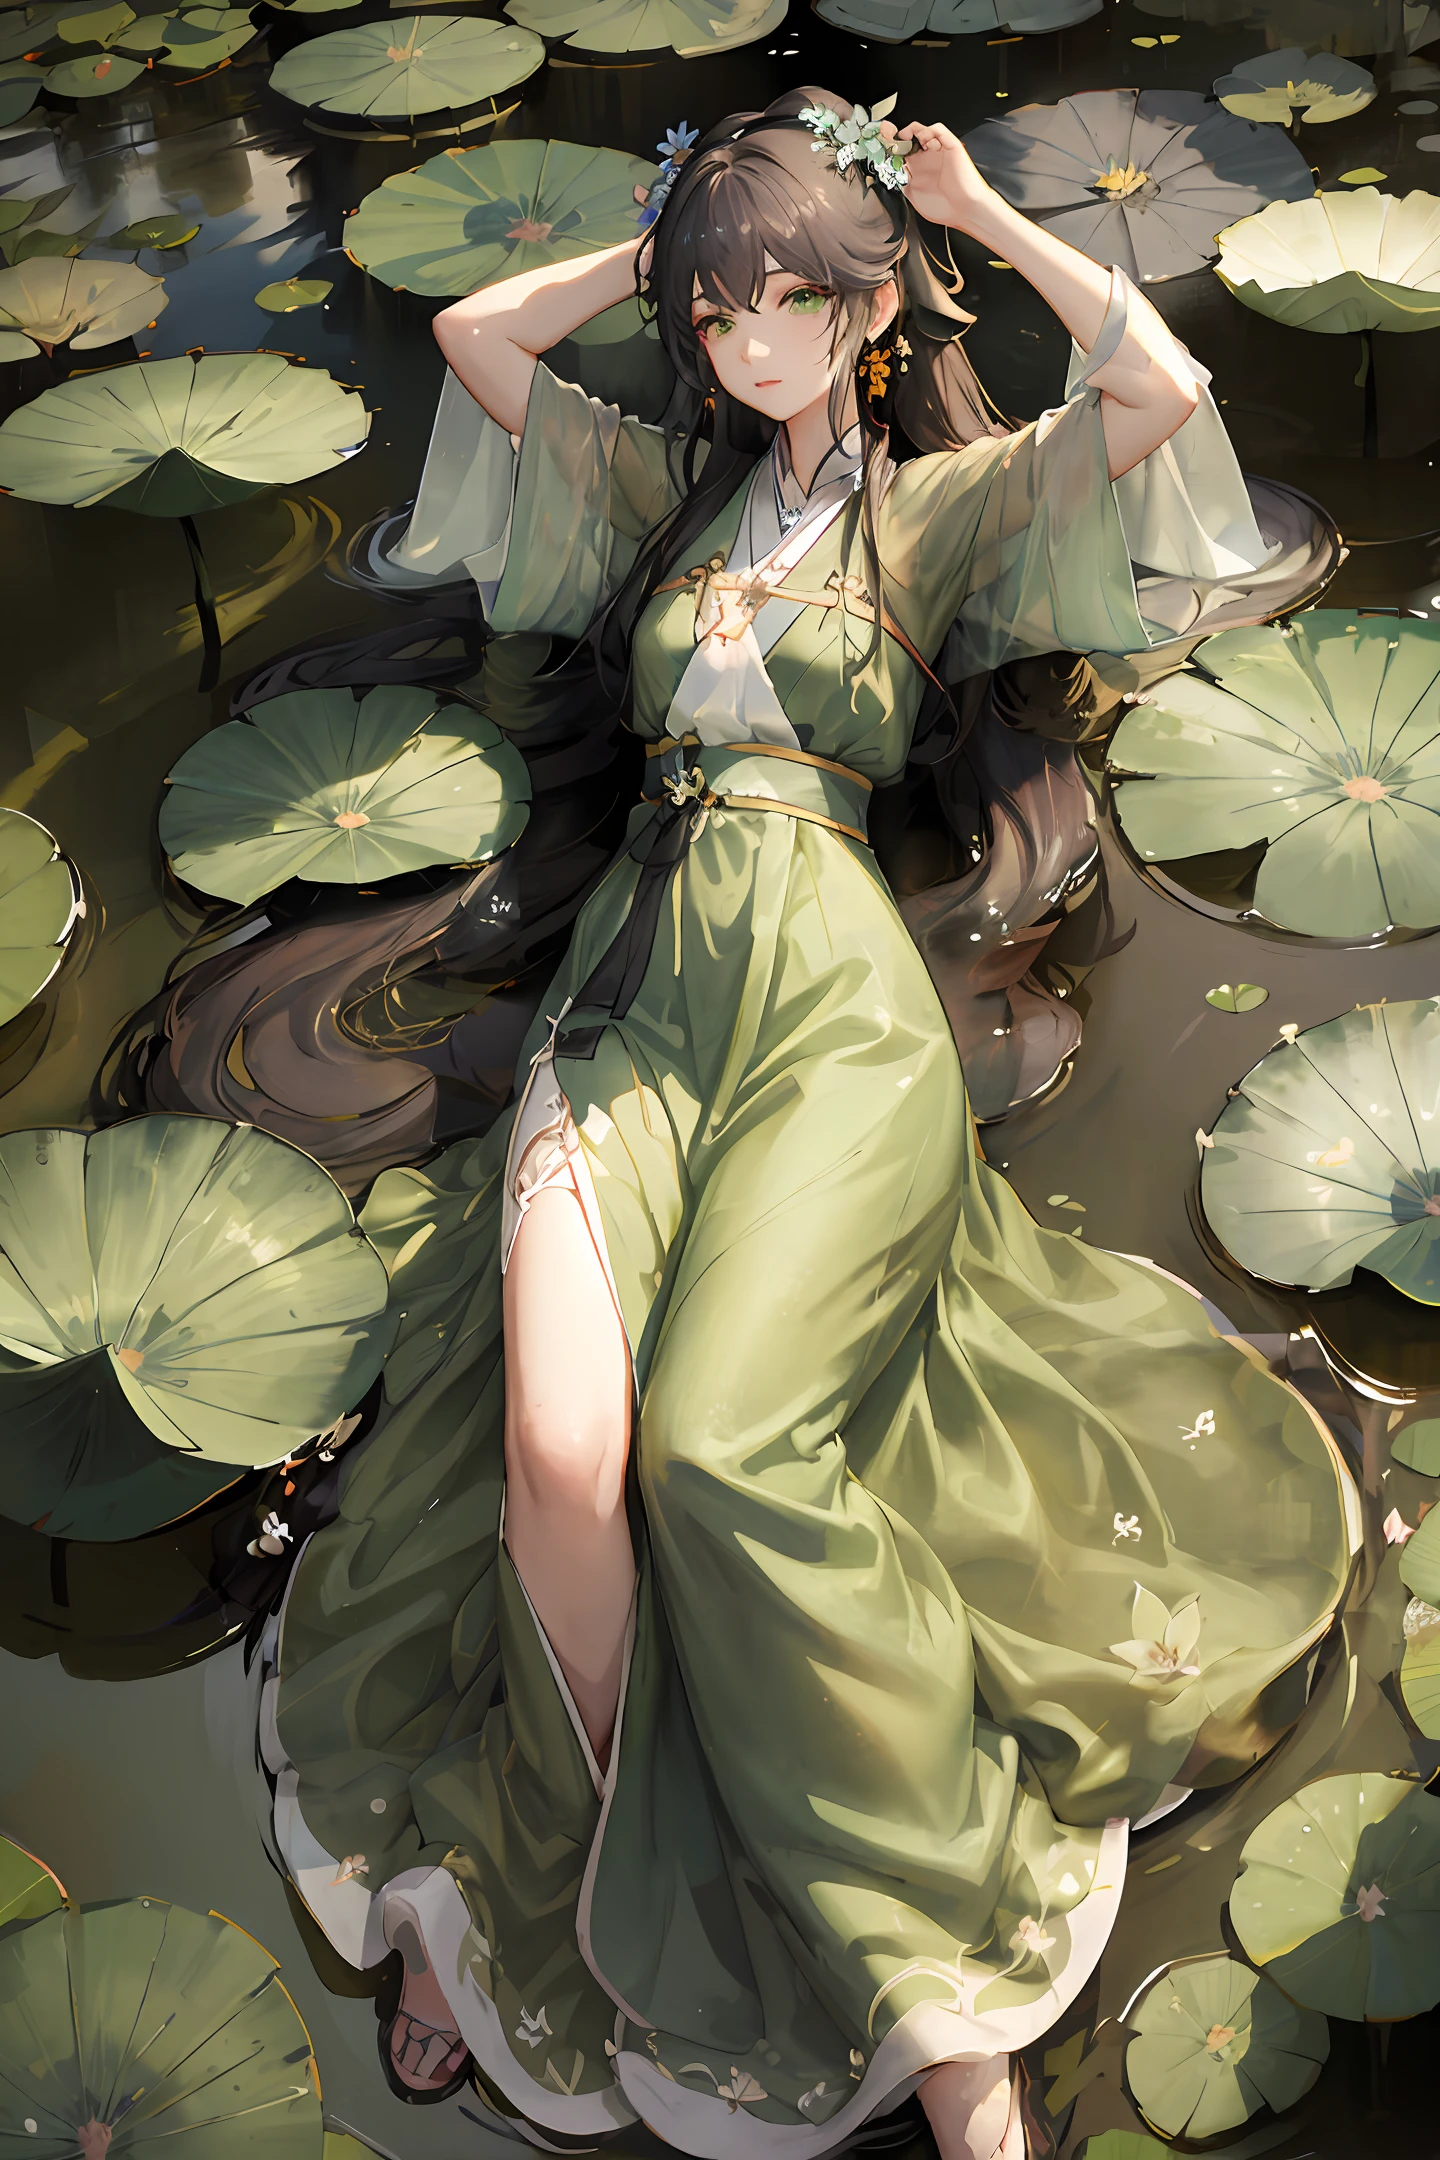 there is a woman in a green dress laying on a lily covered pond, by Yang J, artwork in the style of guweiz, by Zeng Jing, guweiz on pixiv artstation, guweiz, guweiz on artstation pixiv, palace ， a girl in hanfu, by Li Song, beautiful digital artwork, by Chen Lin